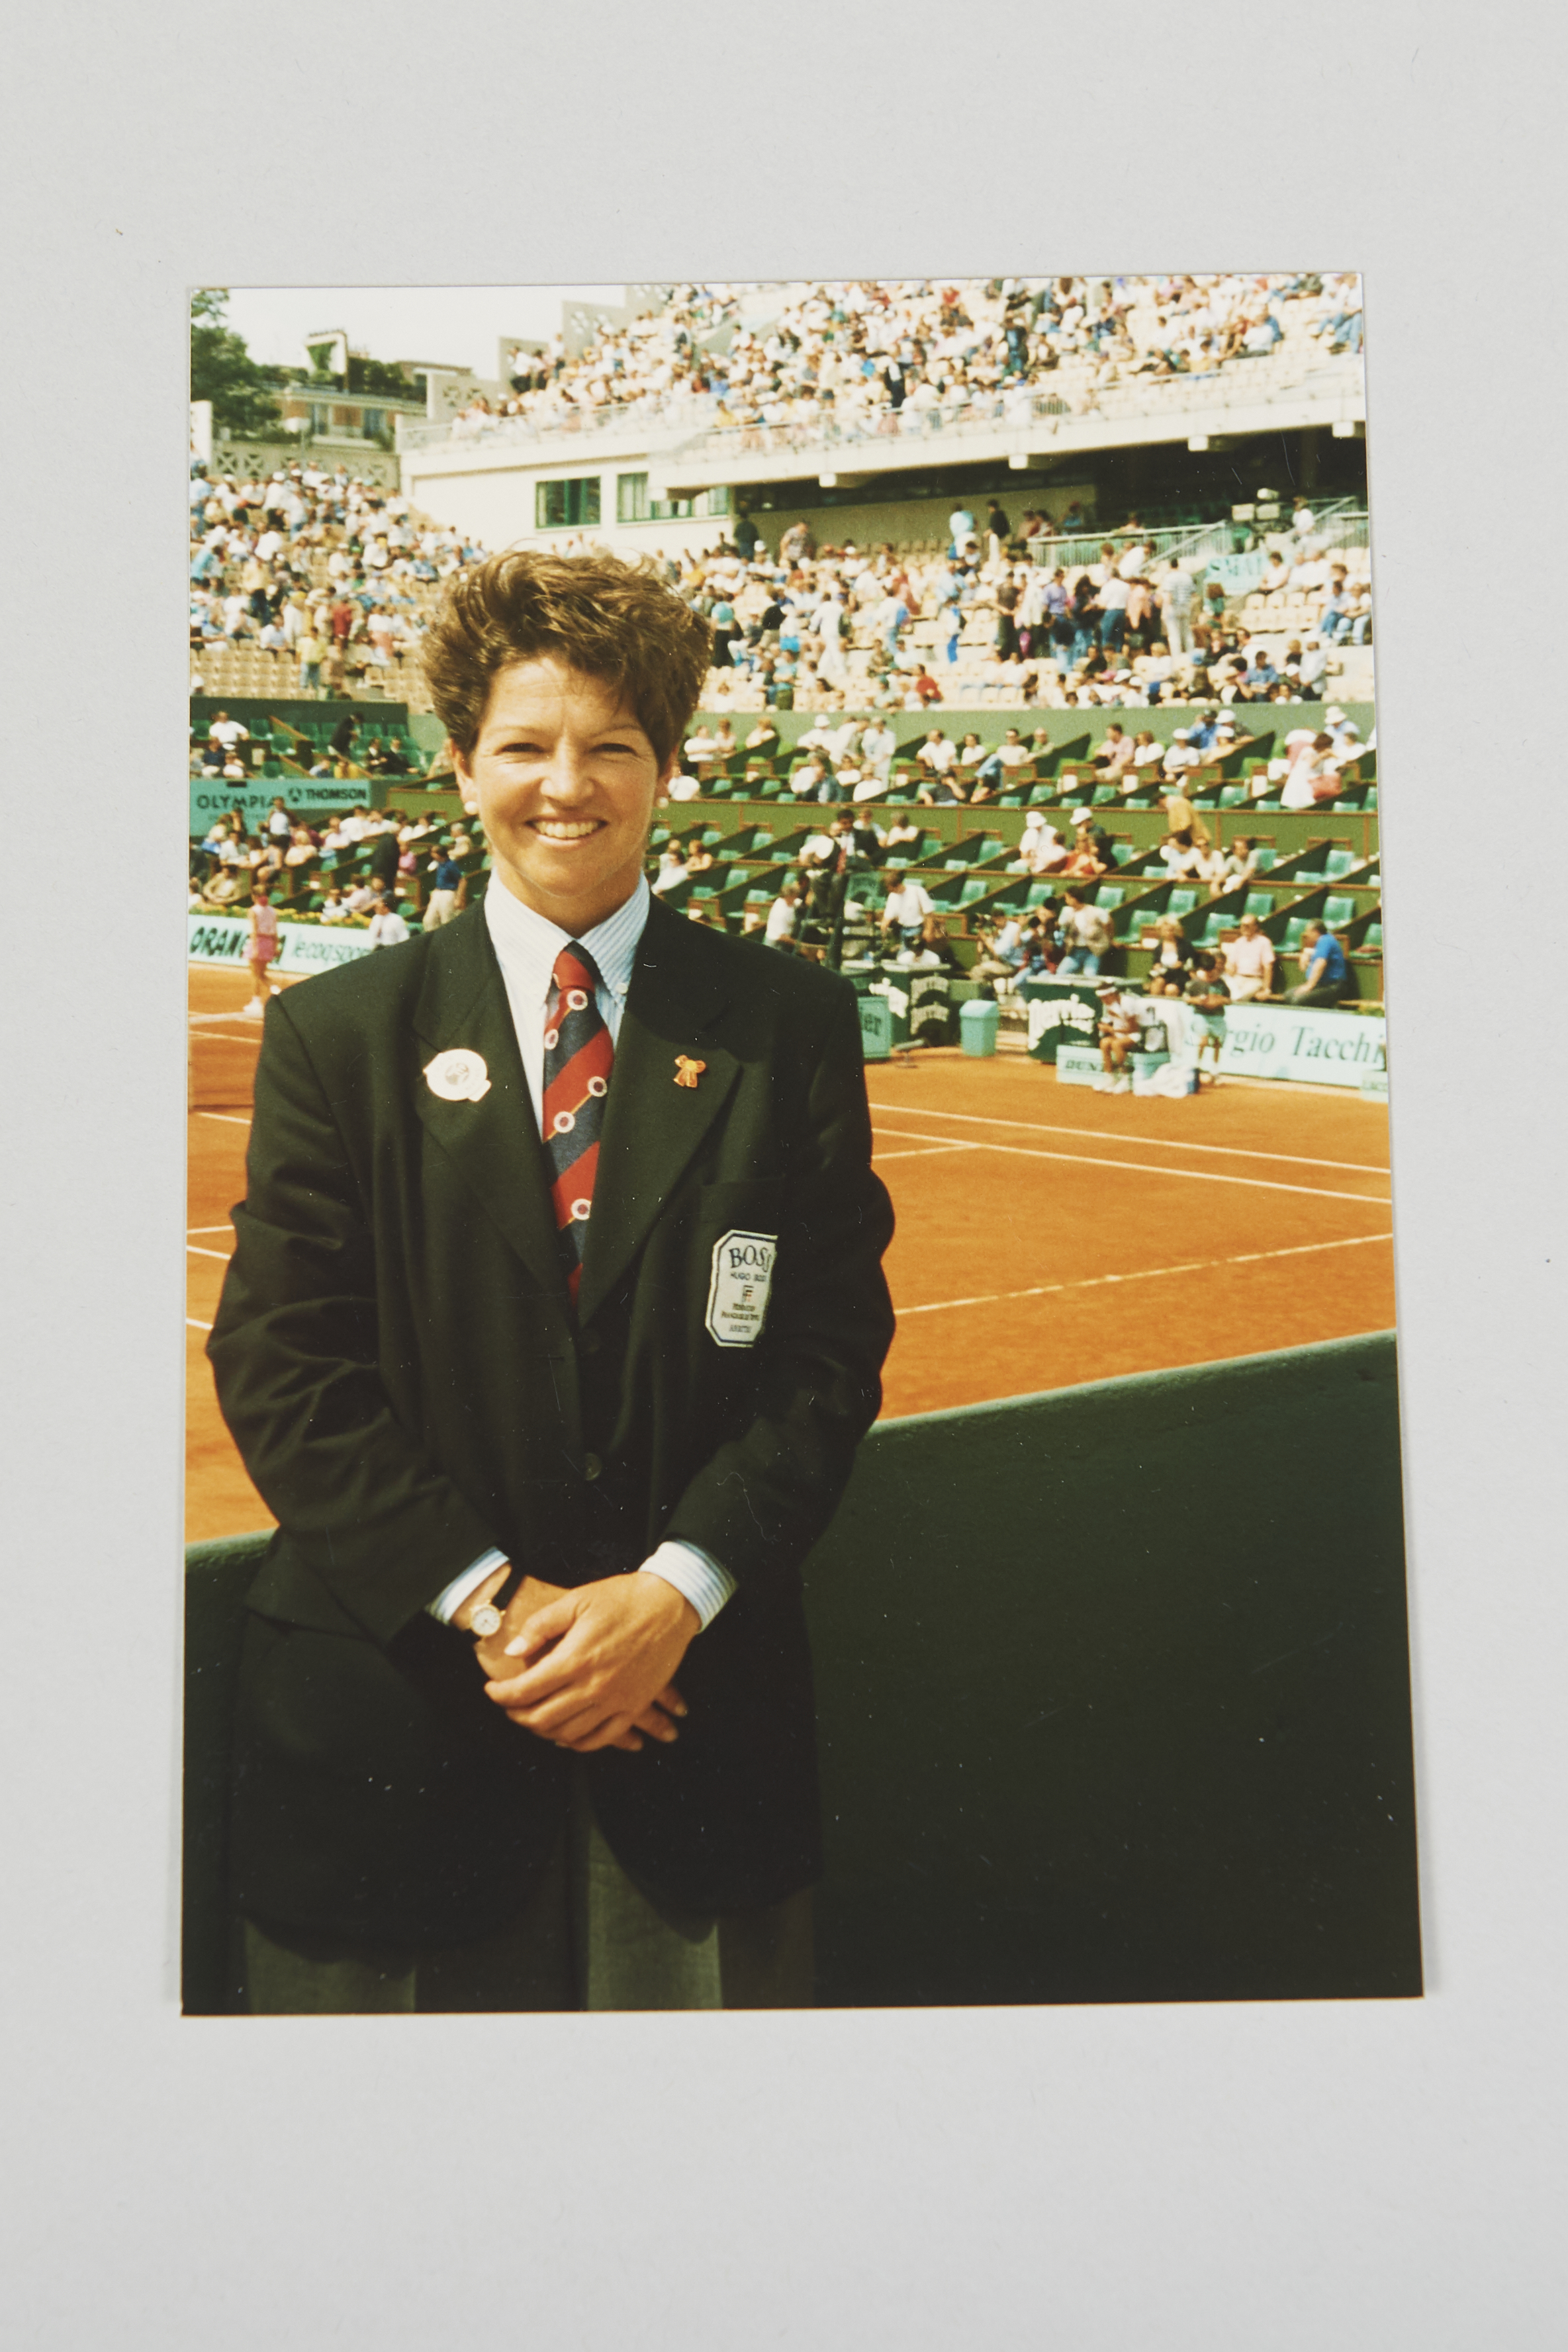 Mary Lou Tierney Officiates at the French Open, 1993